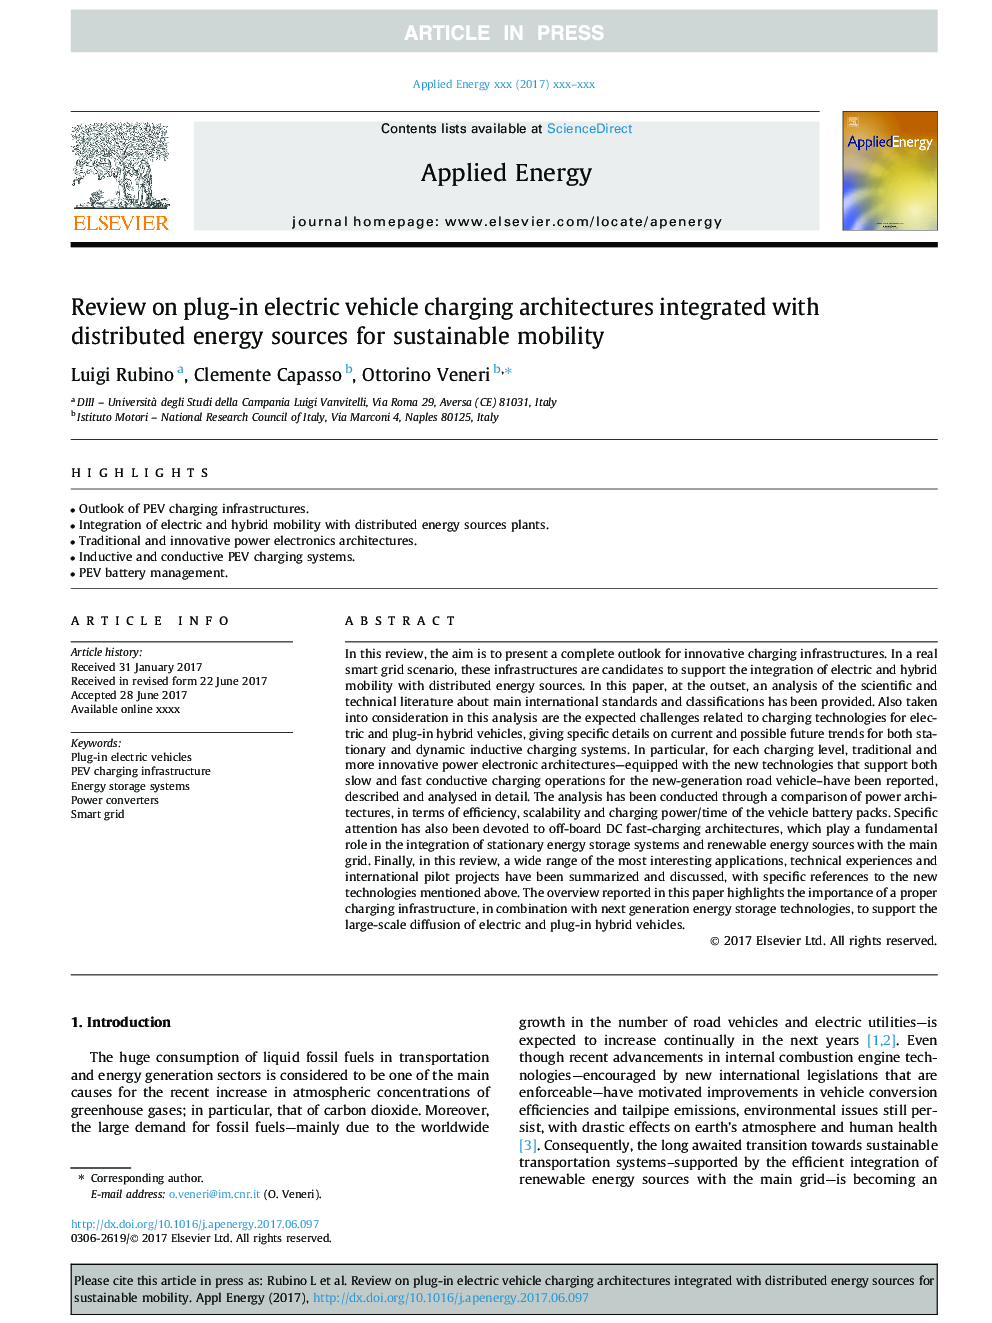 Review on plug-in electric vehicle charging architectures integrated with distributed energy sources for sustainable mobility